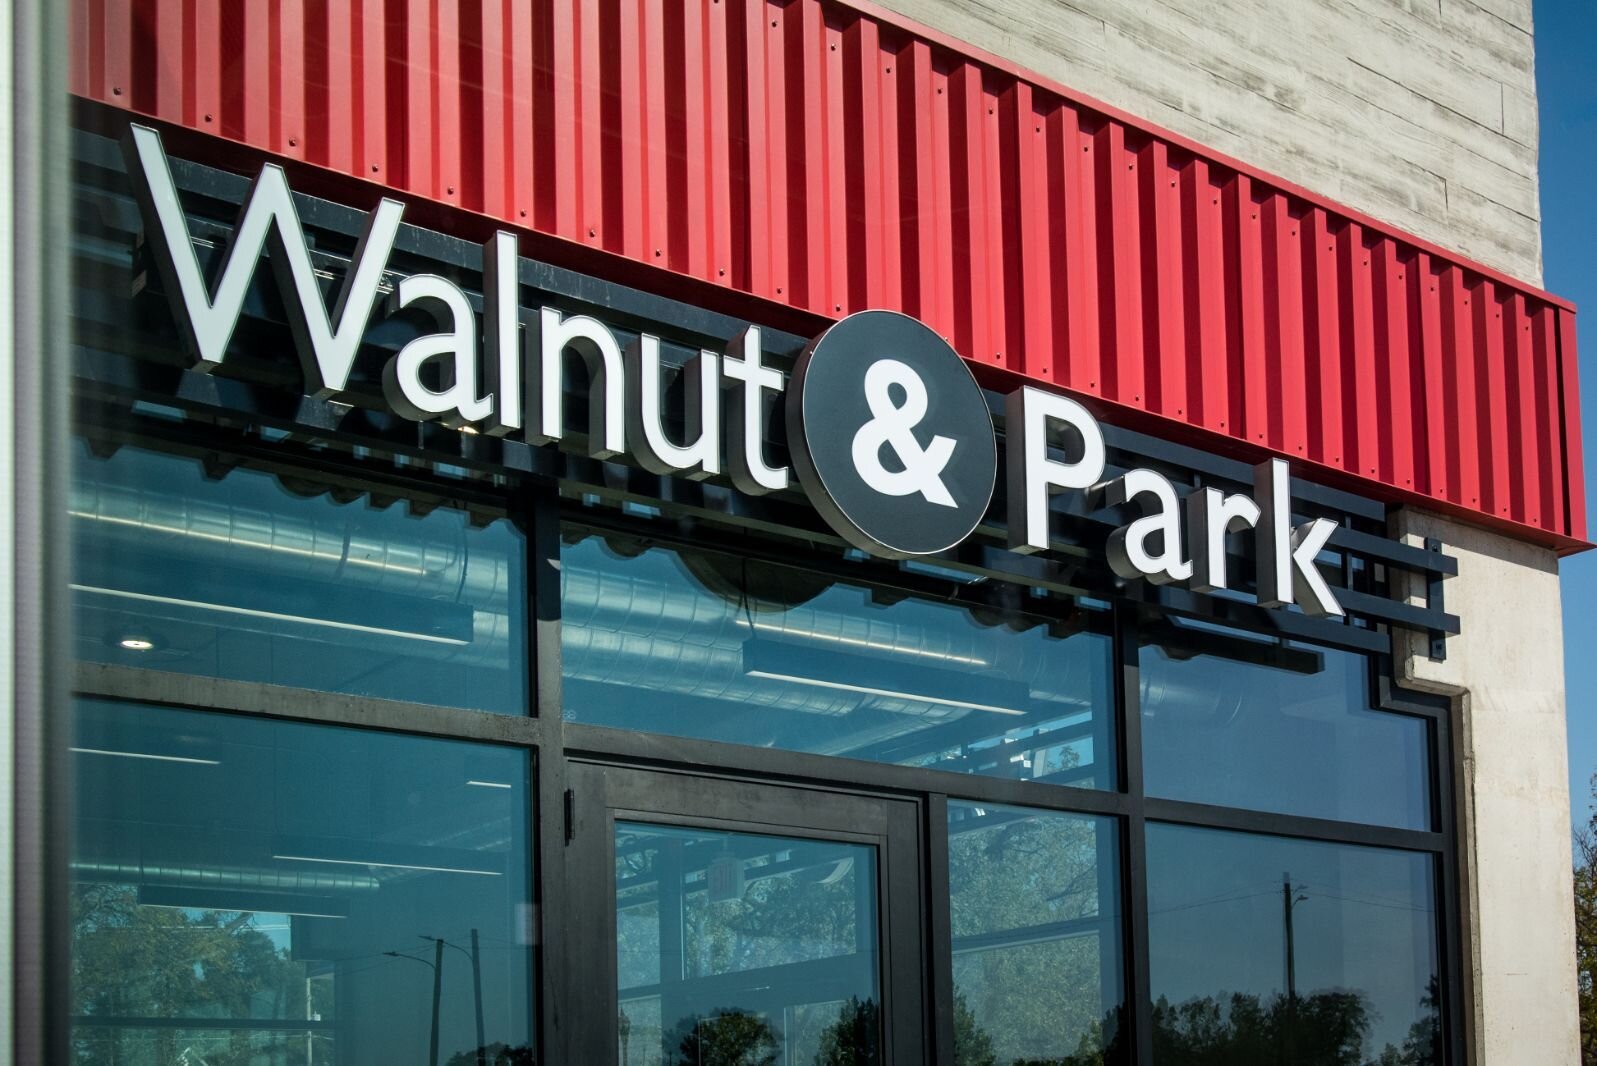 Walnut & Park’s soon-to-open second location in Kalamazo is on the ground floor of Harrison Circle Apartments.